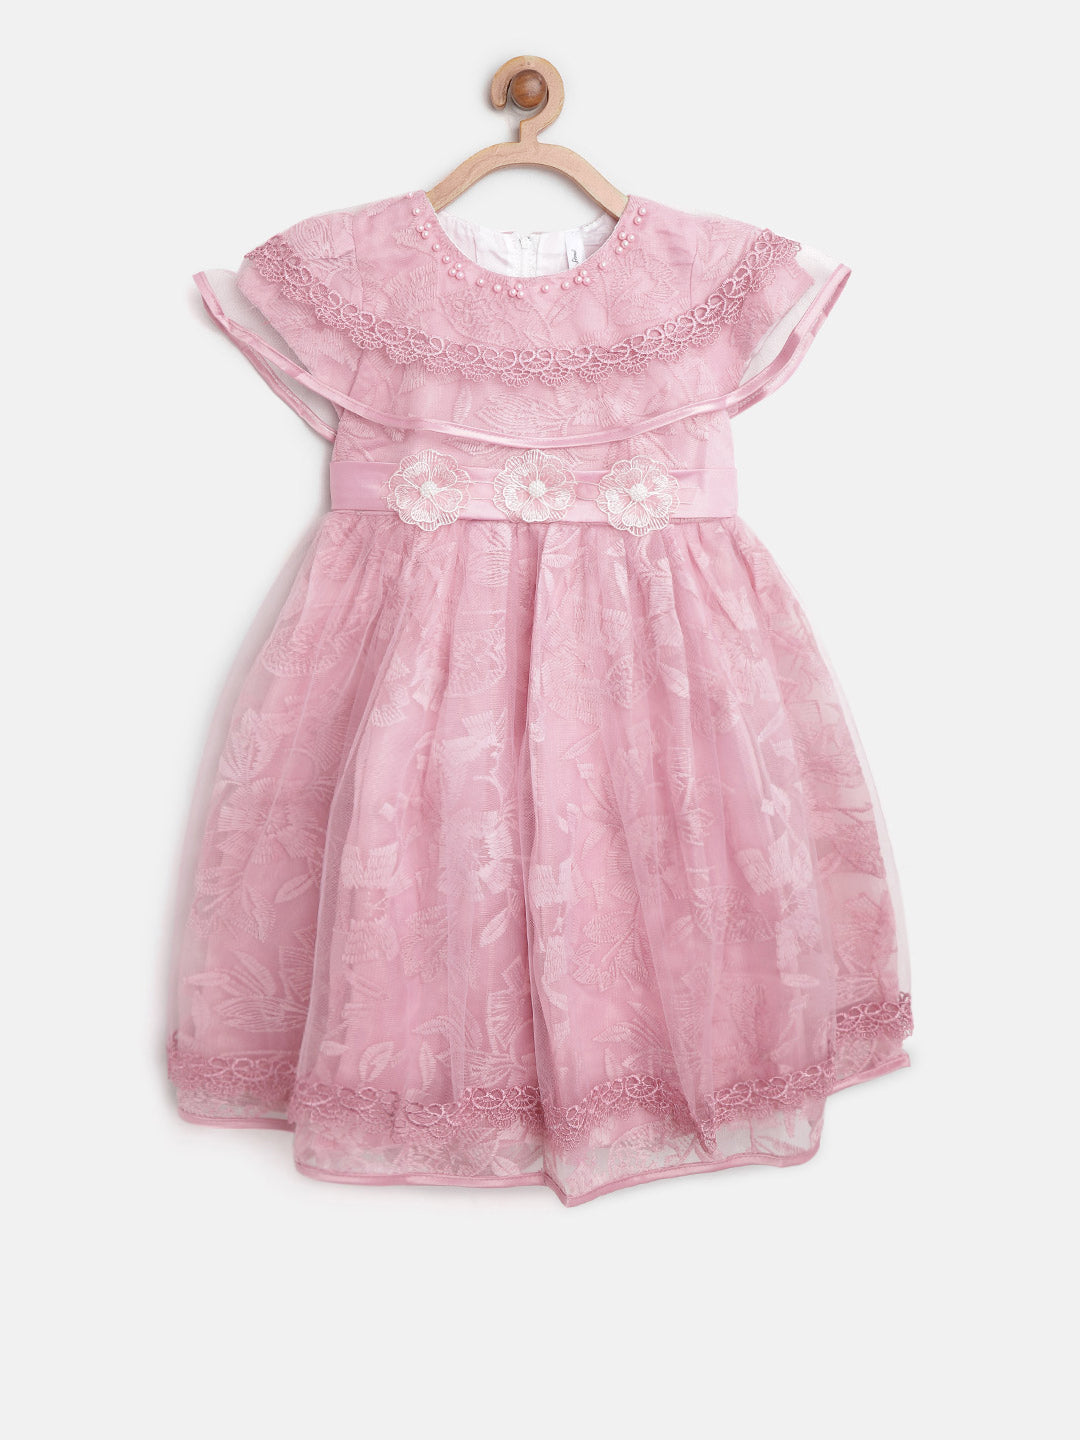 Girls Berry Pink embroidered and embellished Floral Party Dress